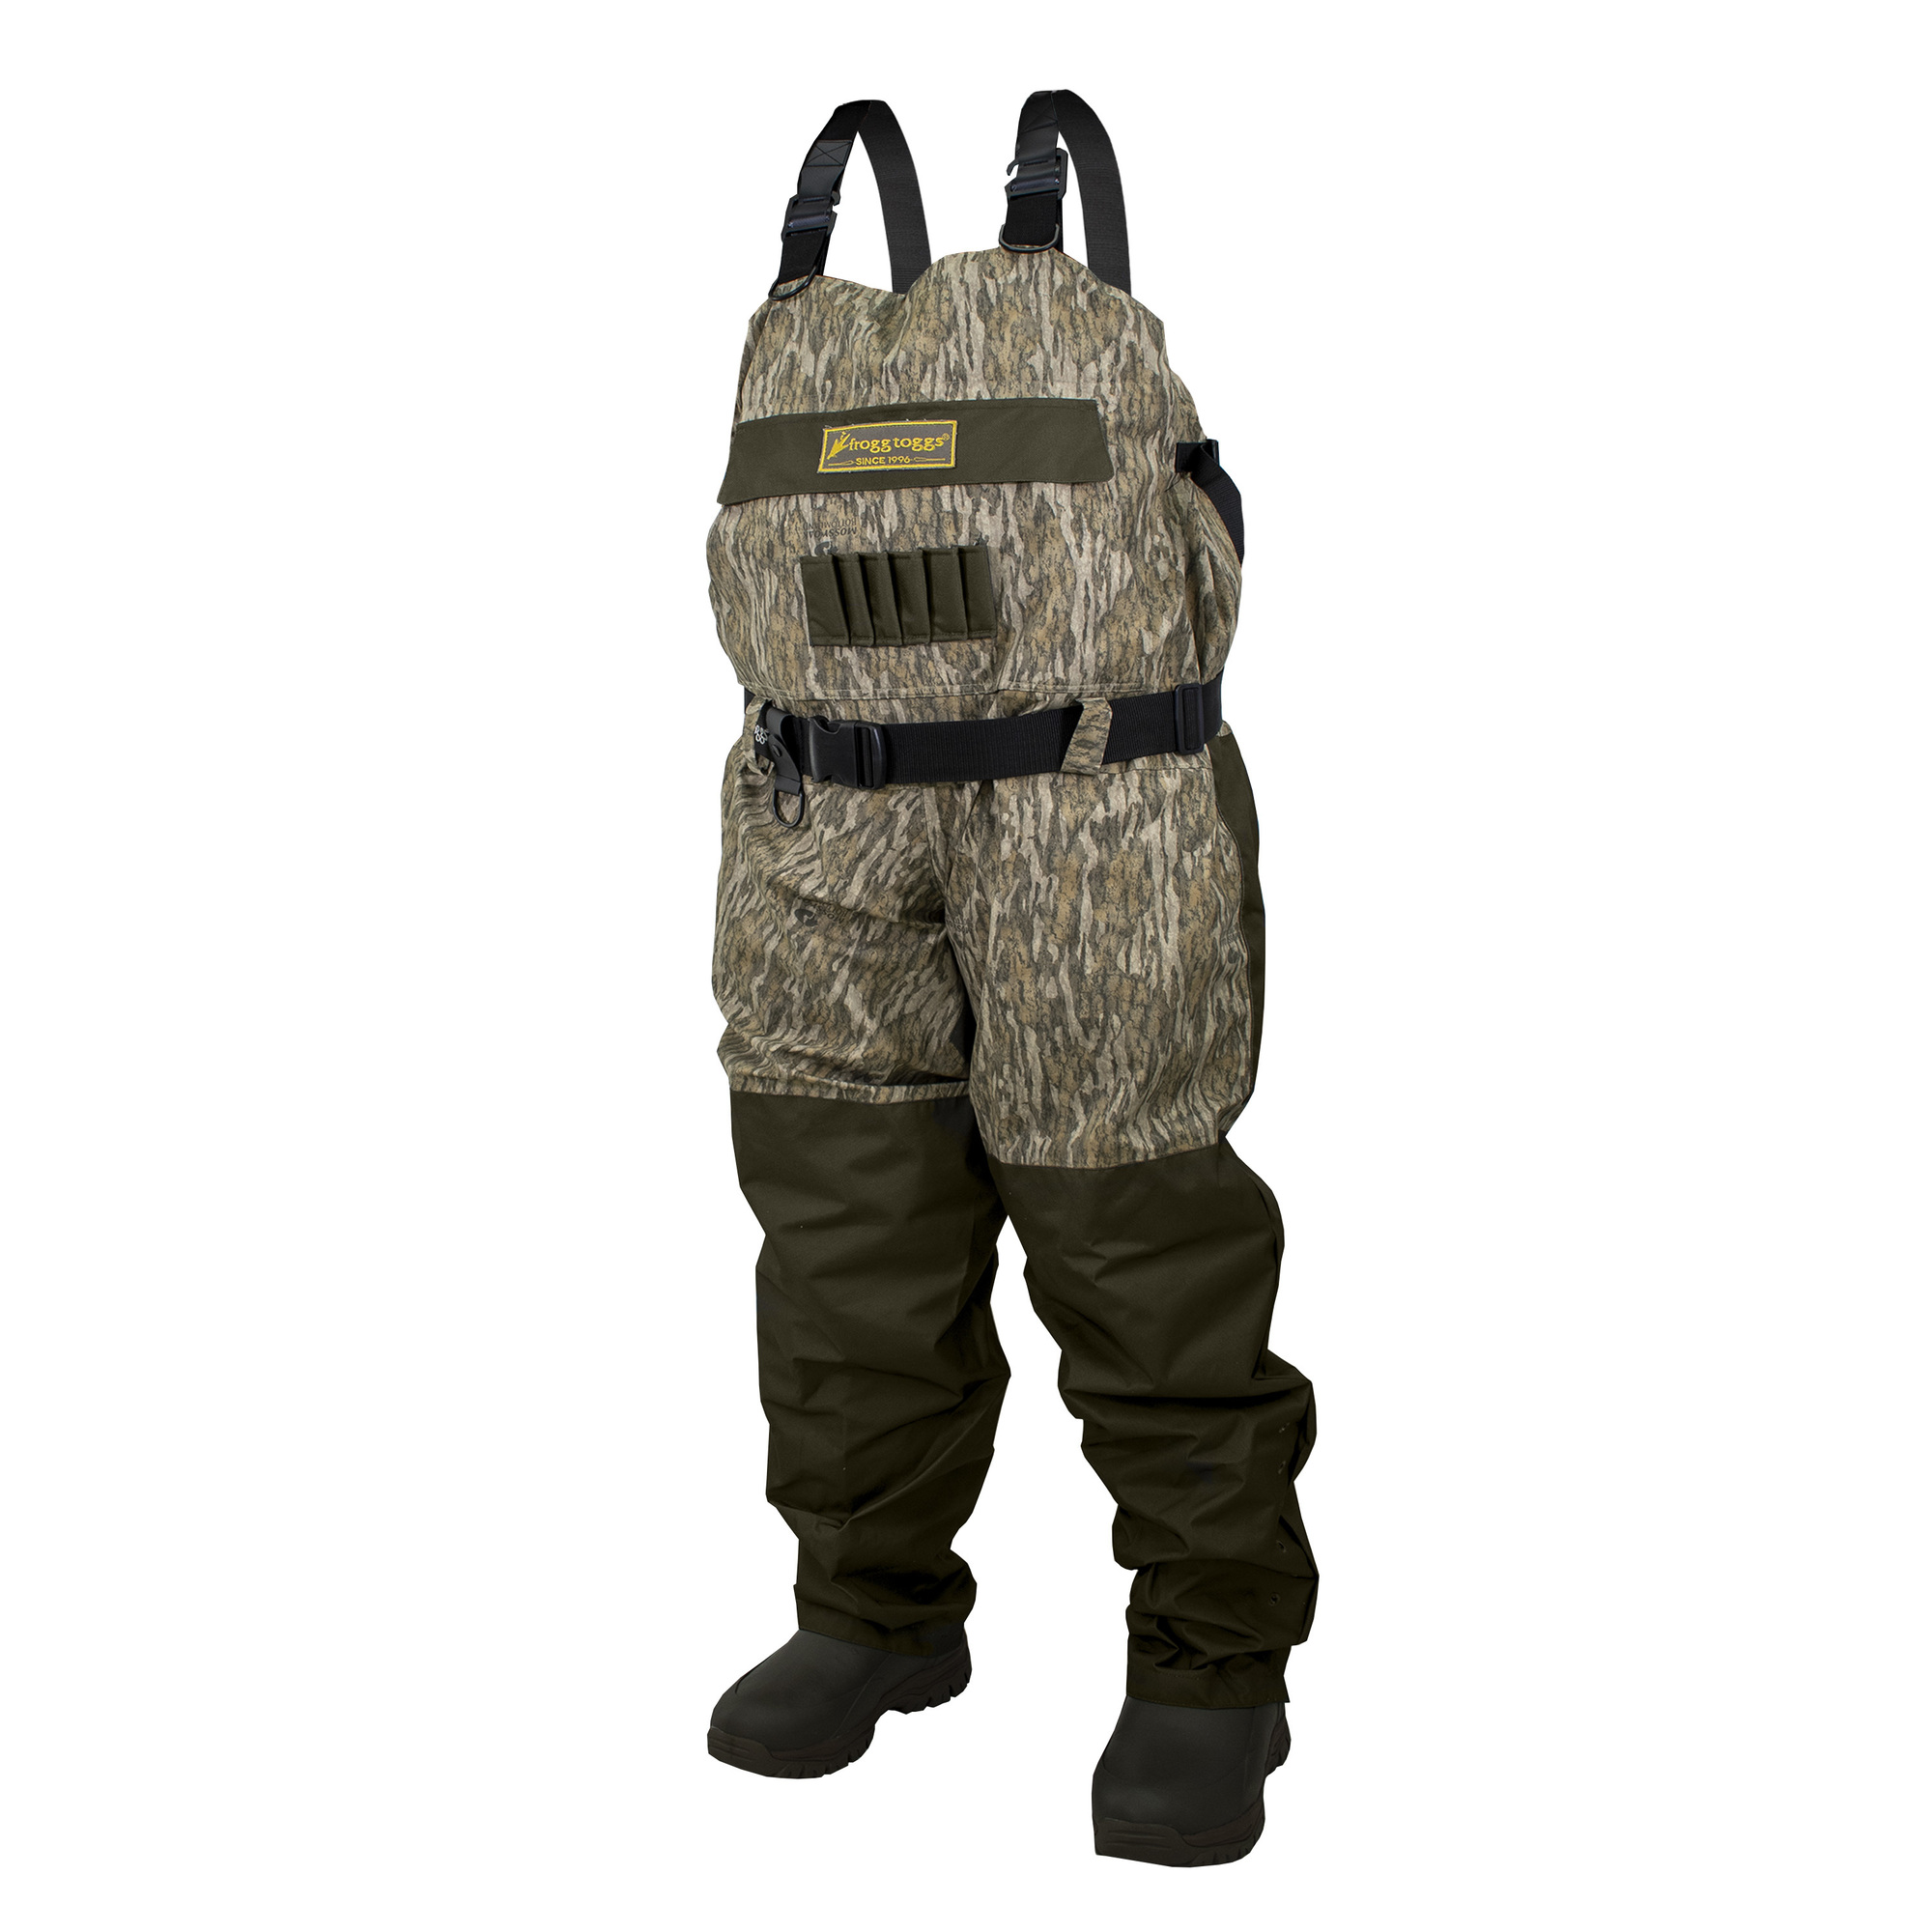 Frogg Toggs Men's Legend Series 2-N-1 Wader | Mossy Oak Bottomland | Size 7, Brown